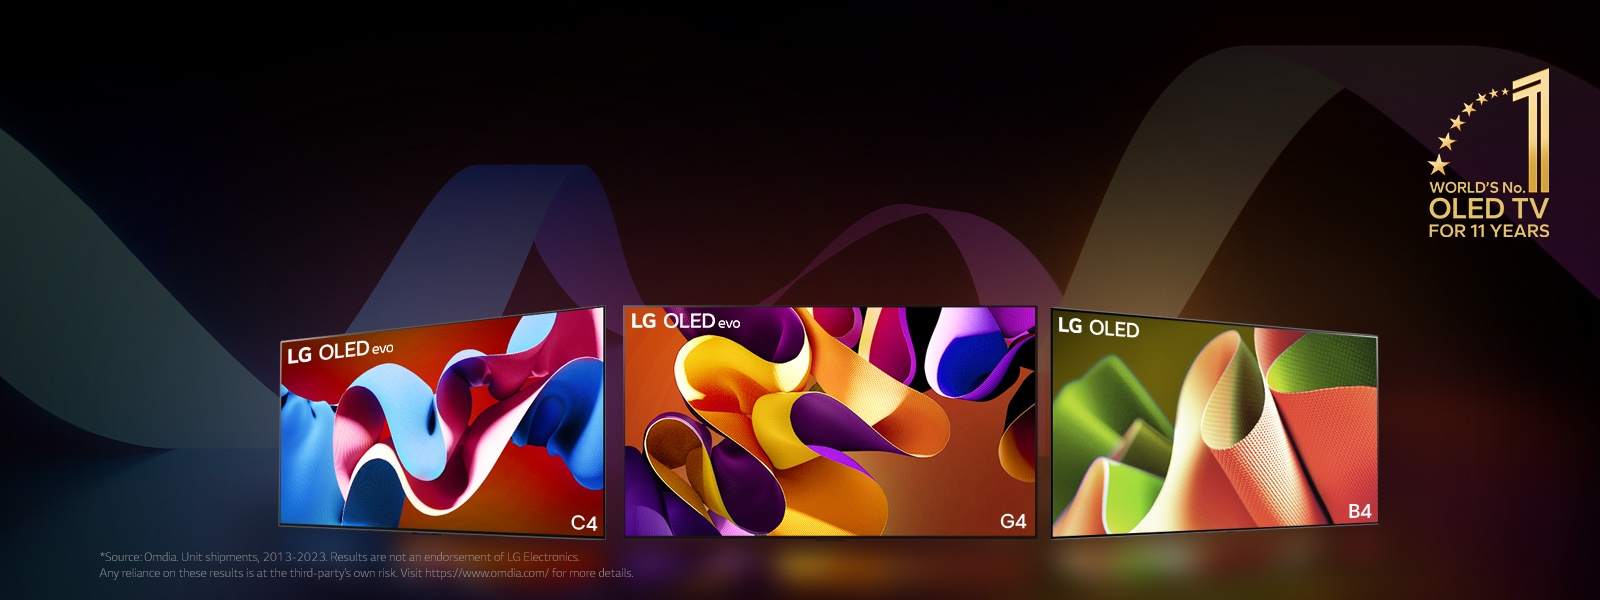 LG OLED evo TV C4, evo G4, and B4 standing in a line against a black backdrop with subtle swirls of color. The "World's number 1 OLED TV for 11 Years" emblem is in the image. 